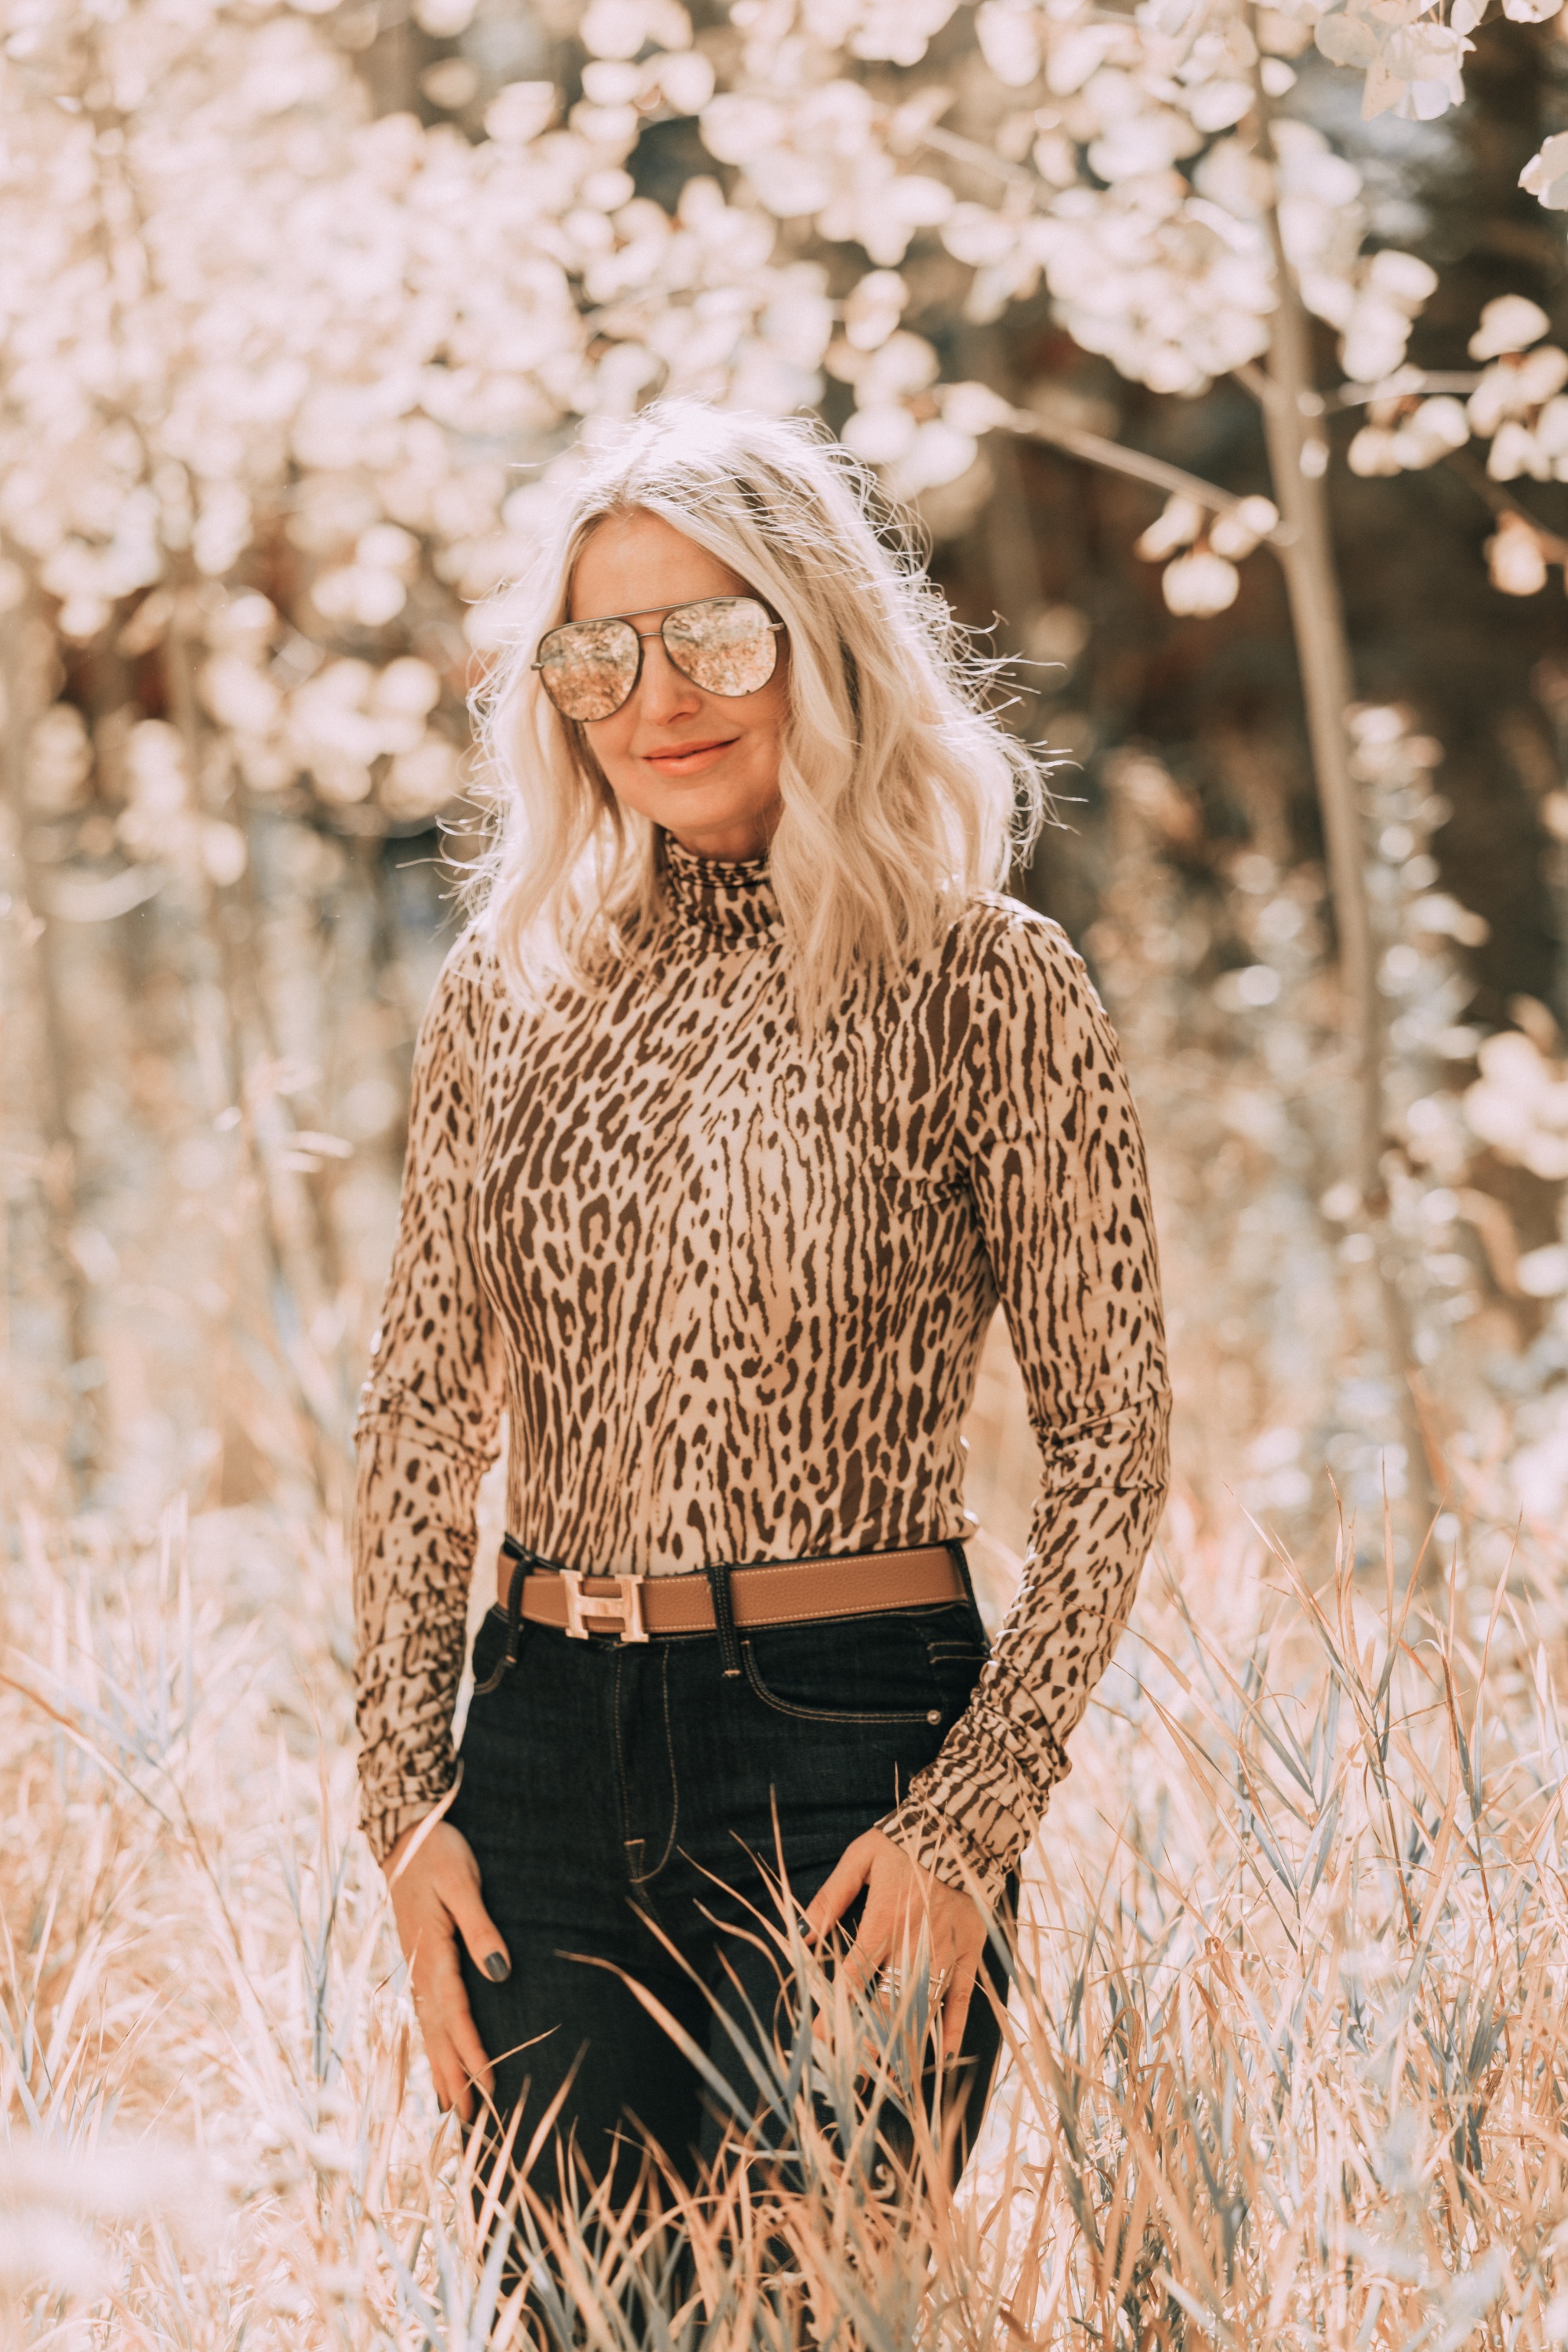 Neutral Fall Outfit, Fashion blogger Erin Busbee of BusbeeStyle.com wearing the camel brown Nordstrom signature blazer with a Zimmerman leopard print turtleneck, rag & bone skinny jeans, Sam Edelman knee high suede boots, and hermes belt in Telluride, CO